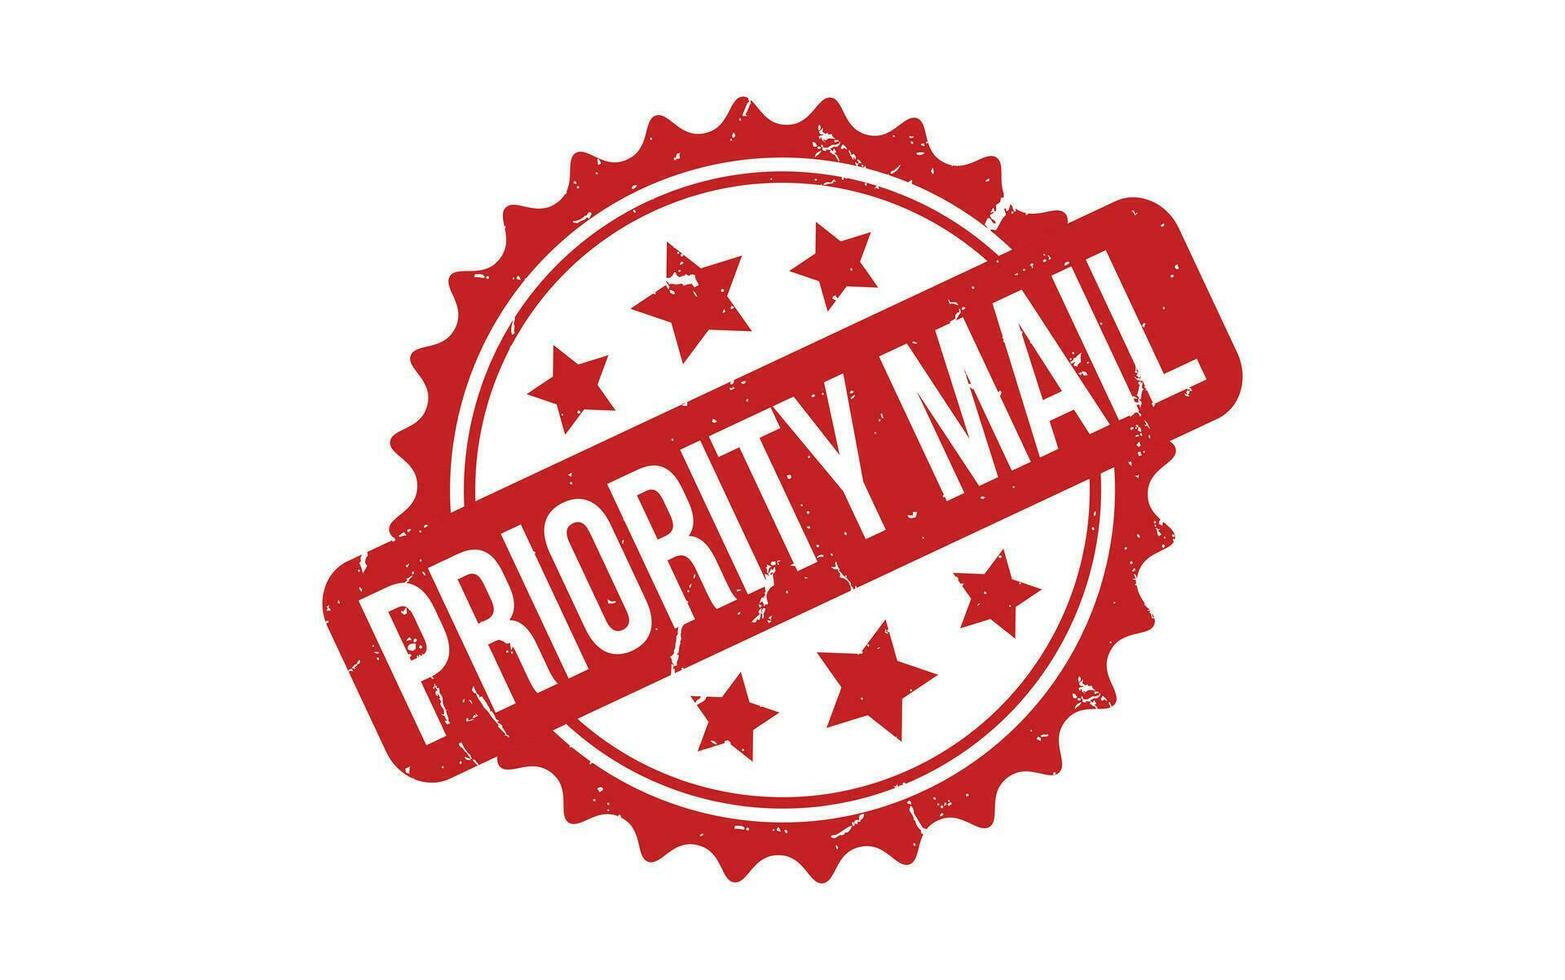 Priority Mail rubber grunge stamp seal vector